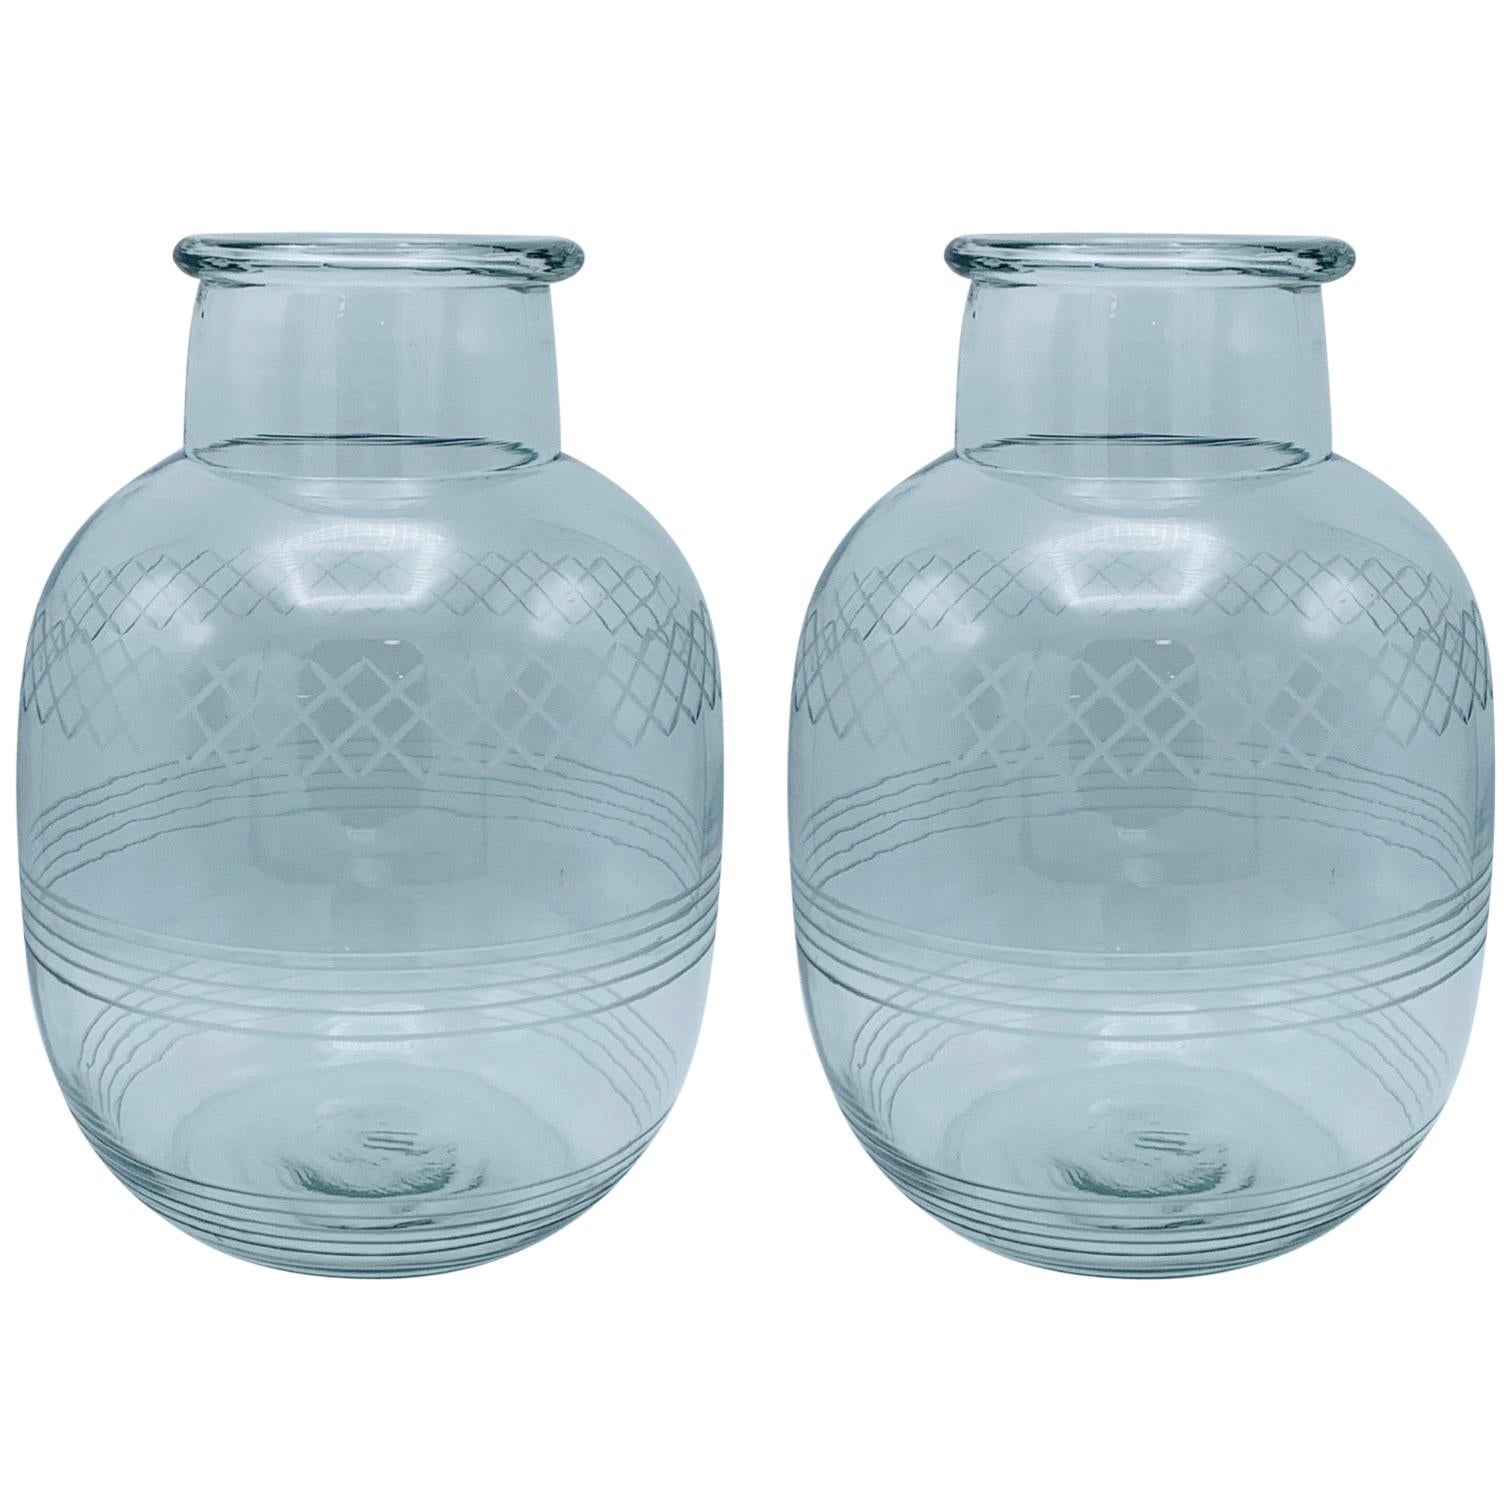 1950s Modern Etched Glass Oversized Vases, Pair For Sale